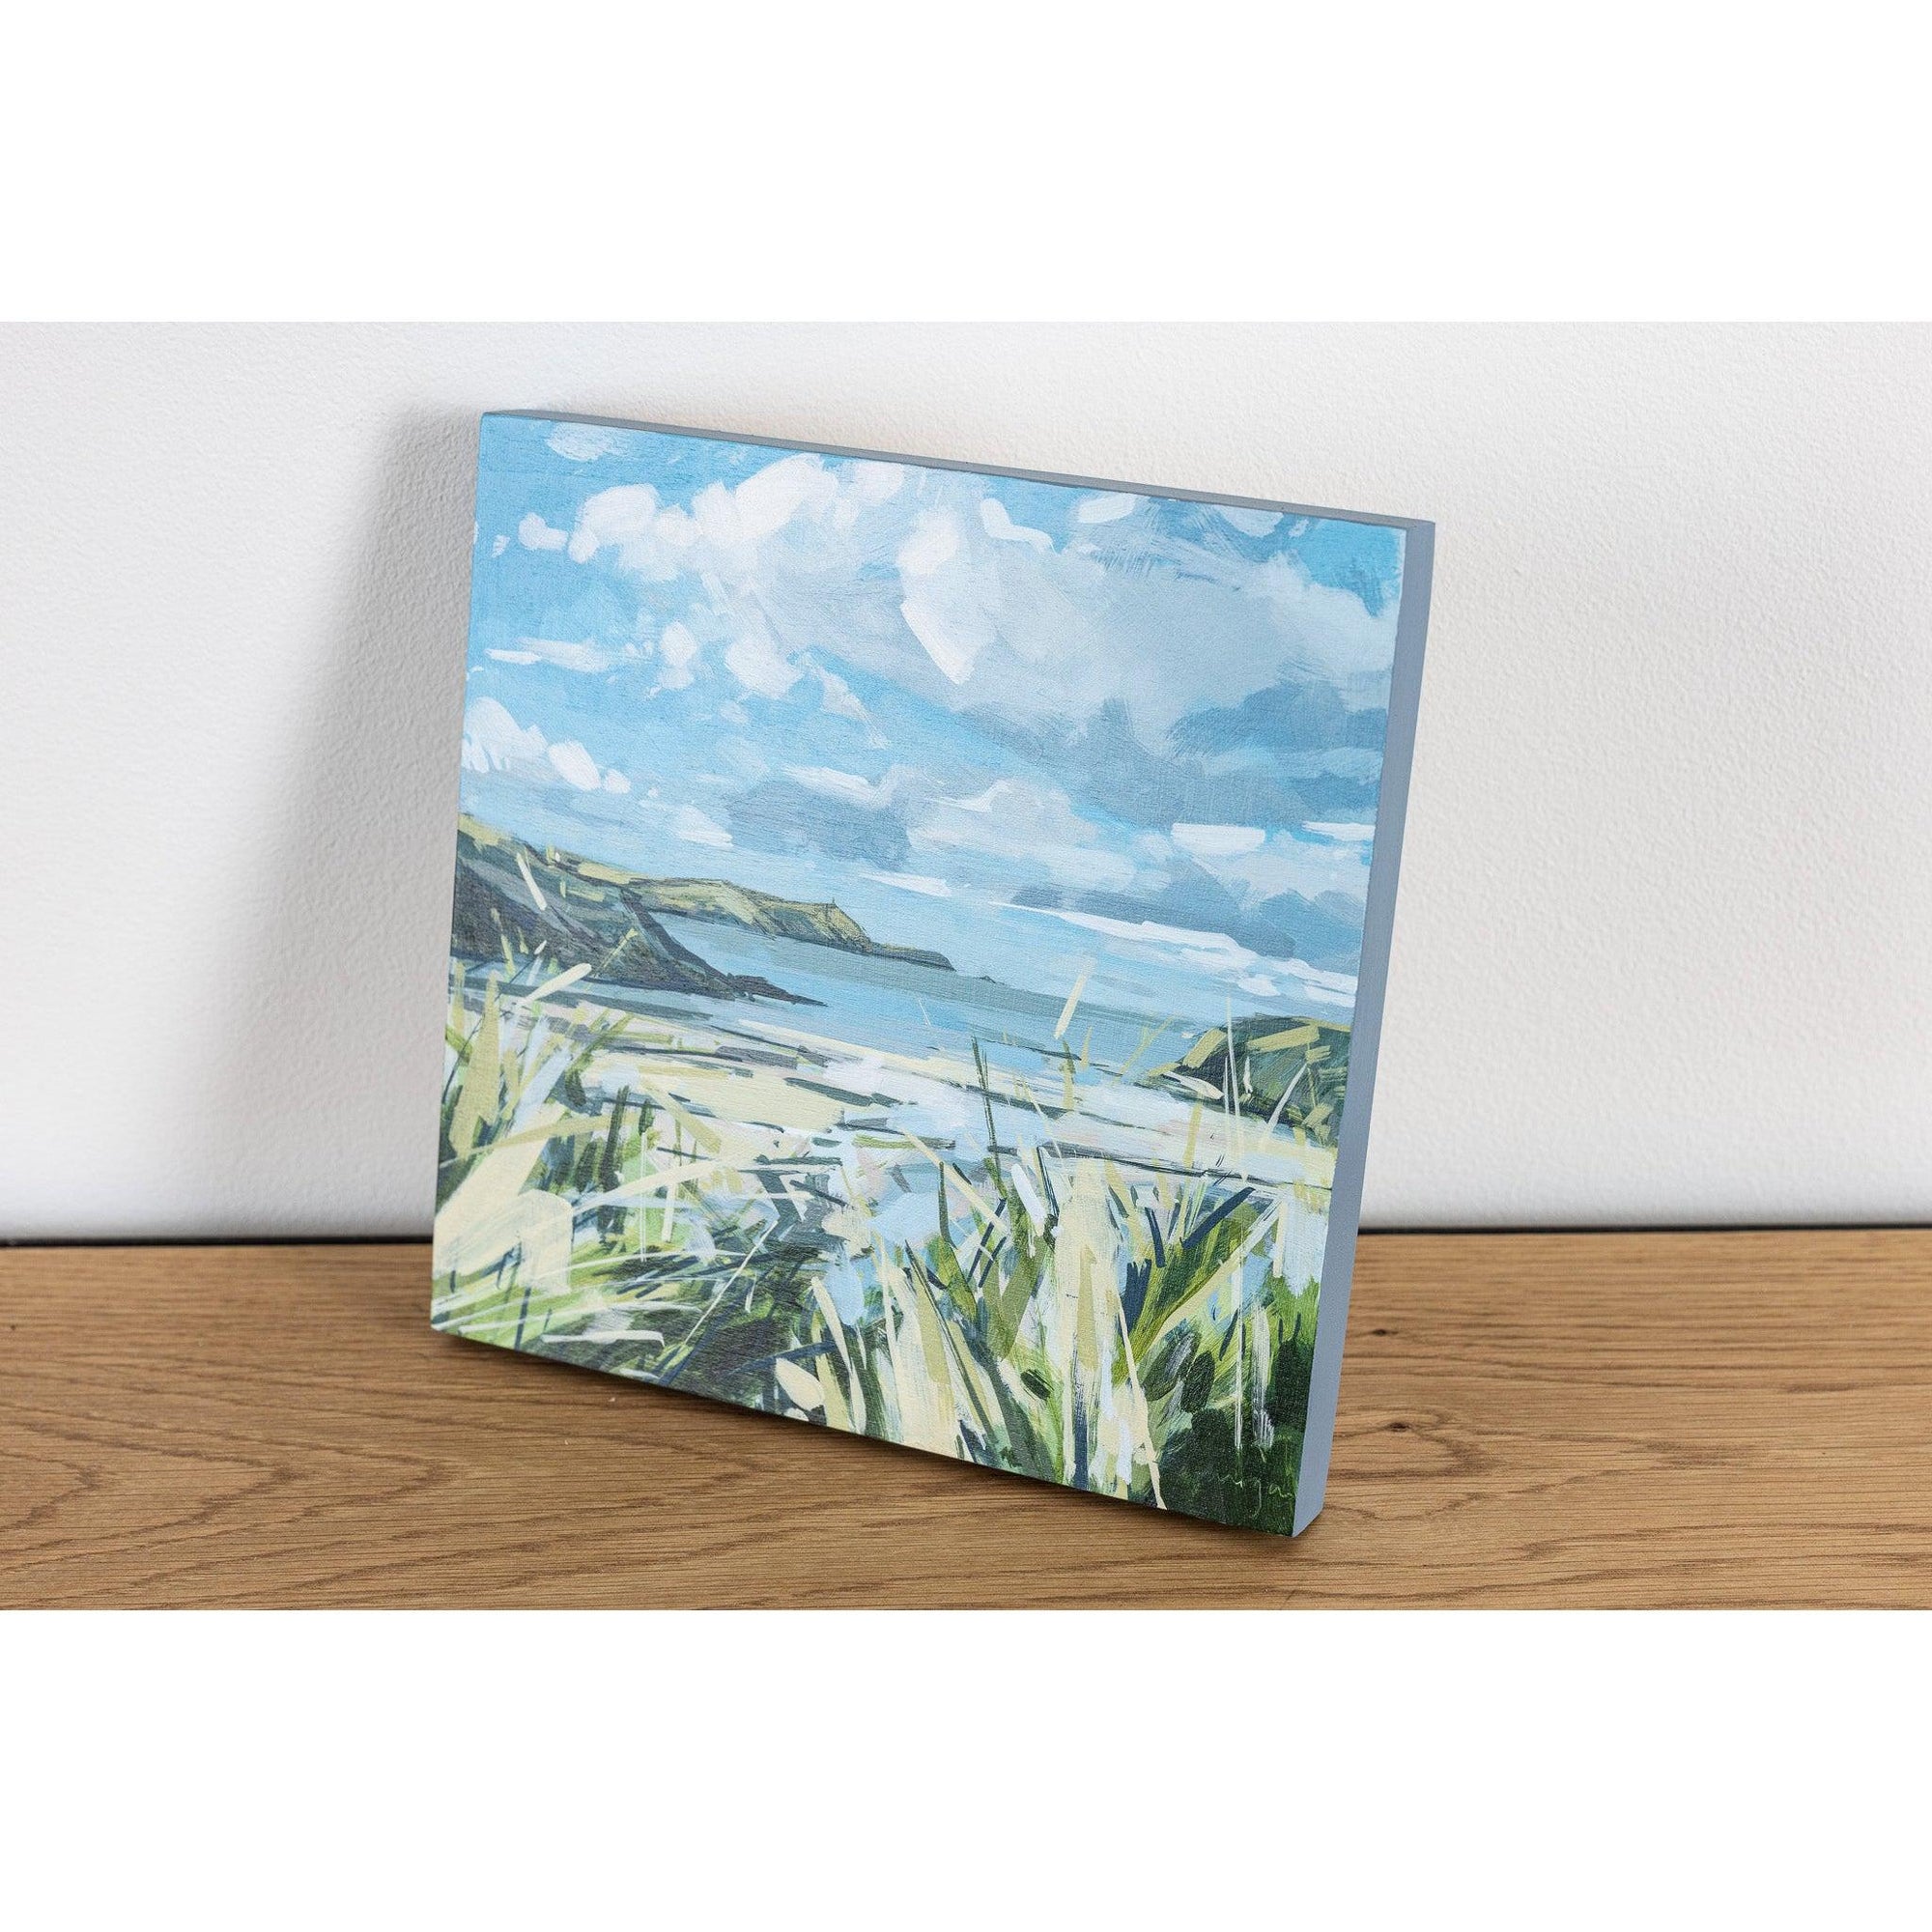 ‘Baby’s Bay’ acrylic on wood block by Imogen Bone. Available at Padstow Gallery, Cornwall